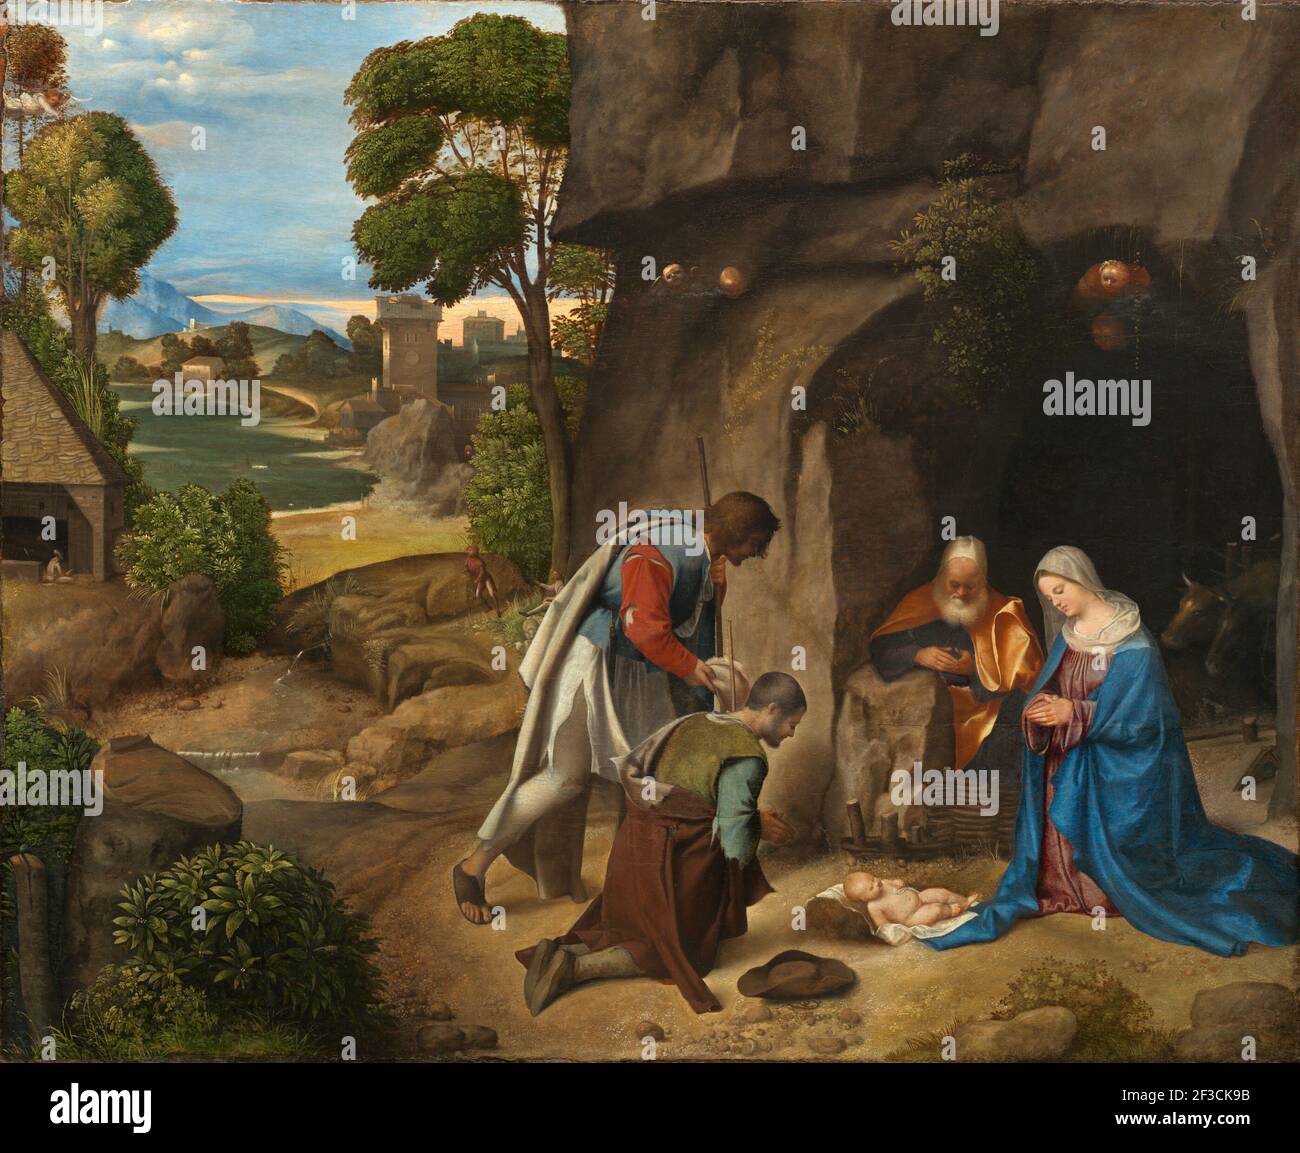 The Adoration of the Shepherds, 1505/1510. Stock Photo